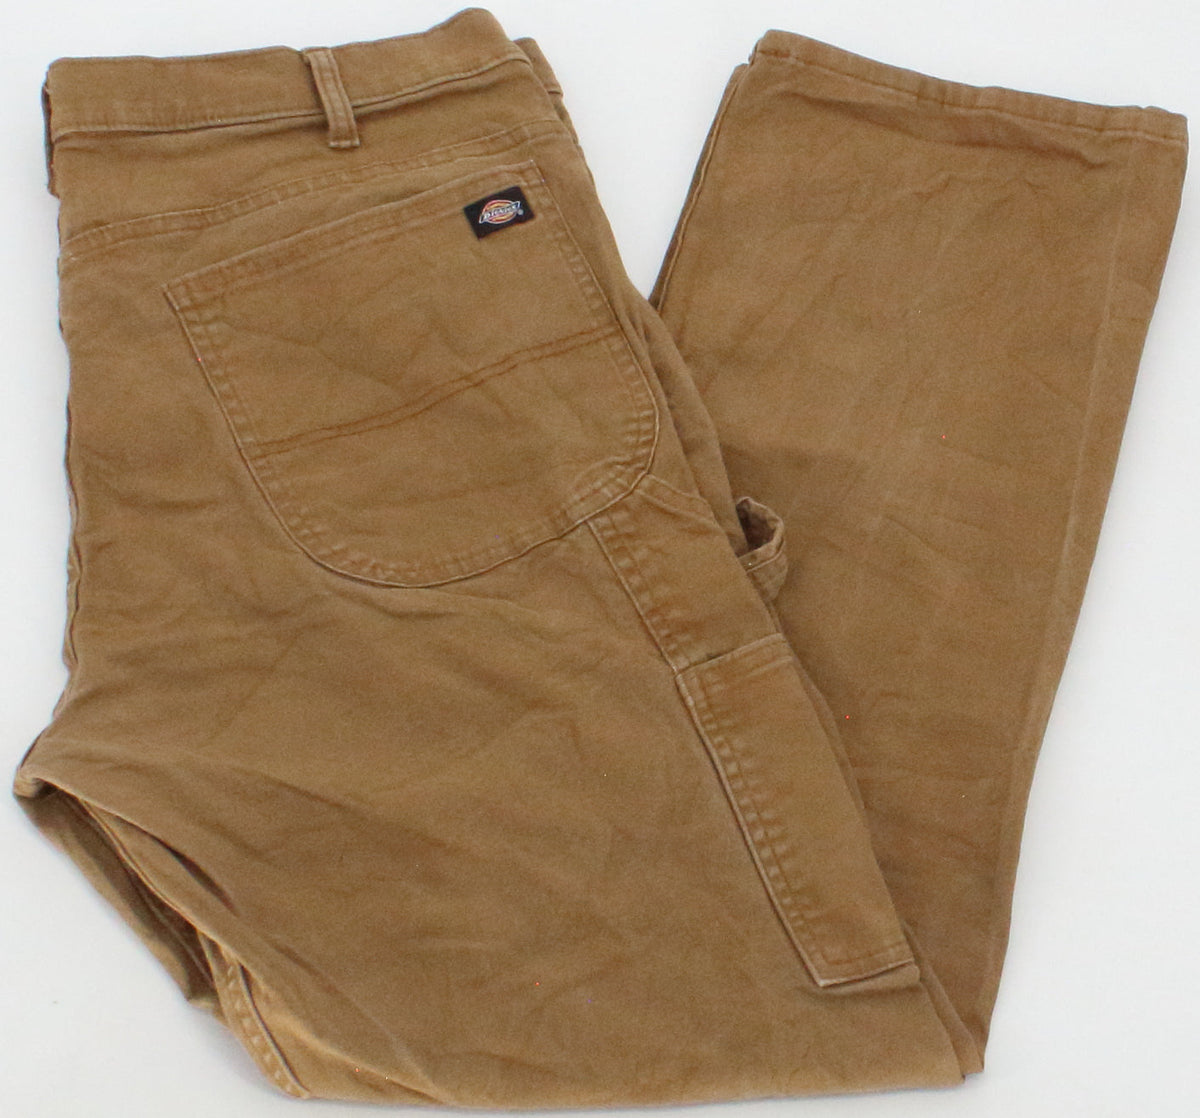 Dickies Camel Flexible and Durable Camel Cargo Pants